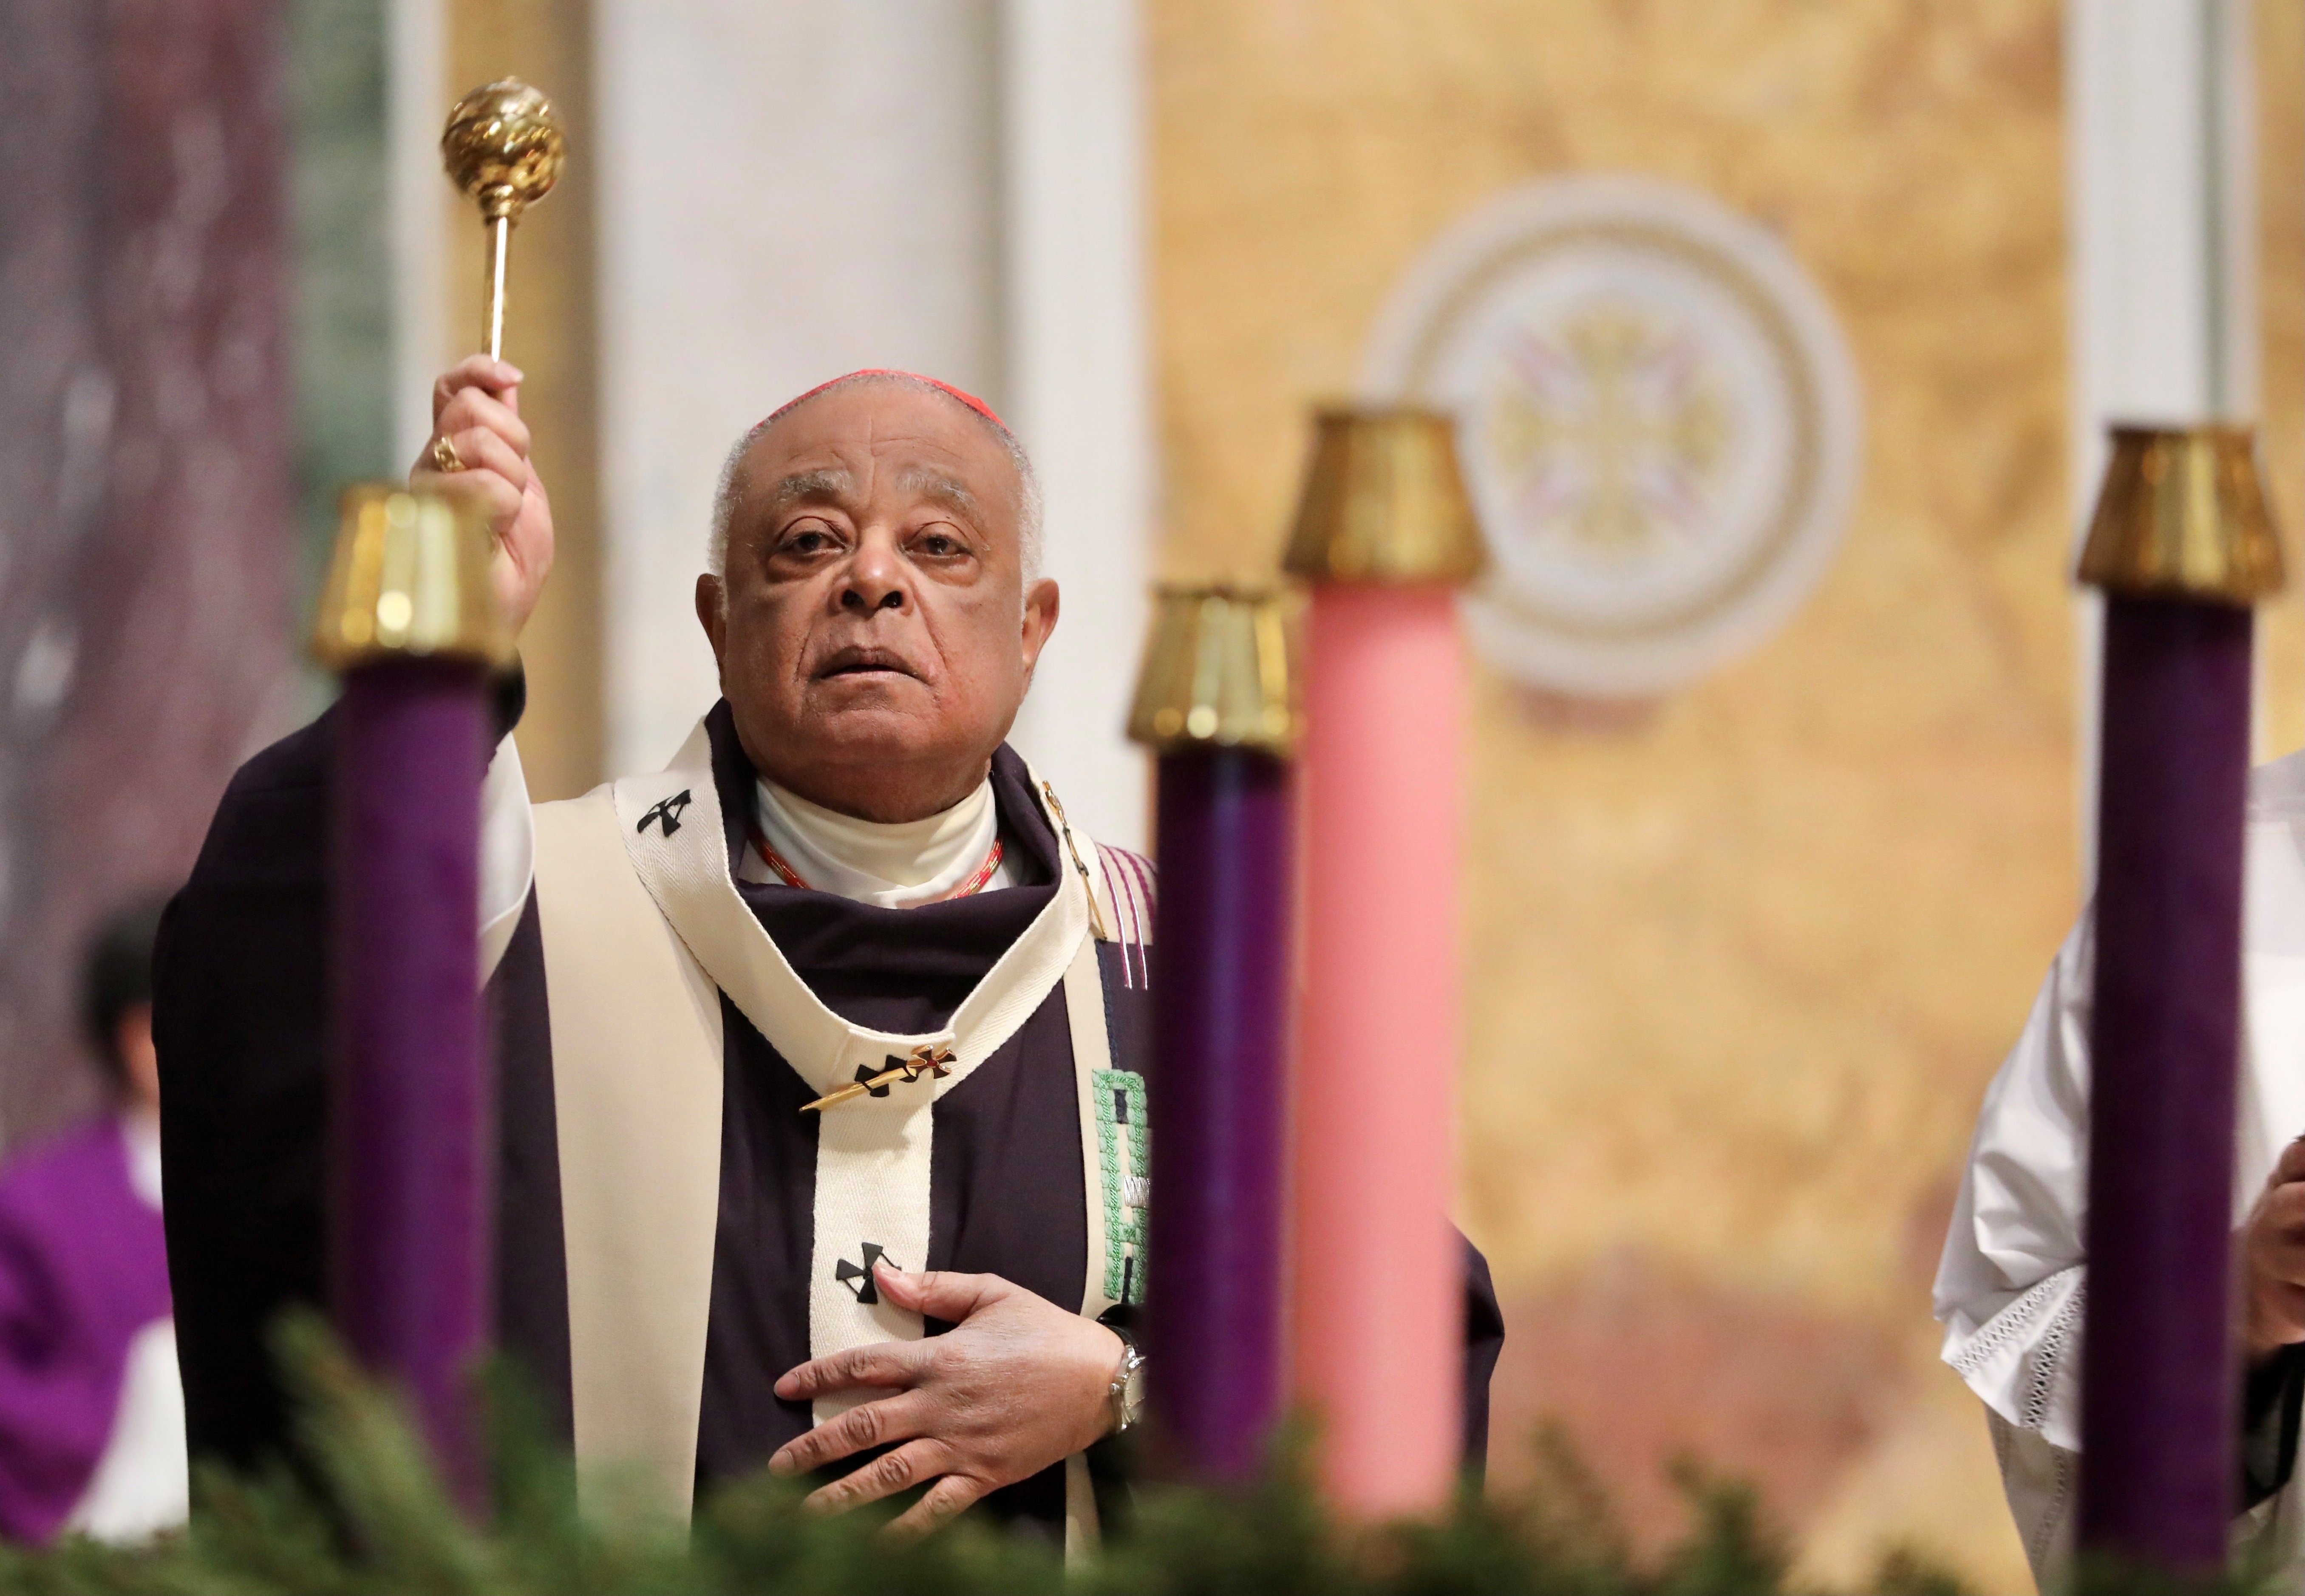 Washington Cardinal Wilton D. Gregory sprinkles holy water to bless the Advent wreath during Mass at St. Matthew's Cathedral Nov. 28, 2021, the first Sunday of Advent. (CNS photo/Andrew Biraj, Catholic Standard)